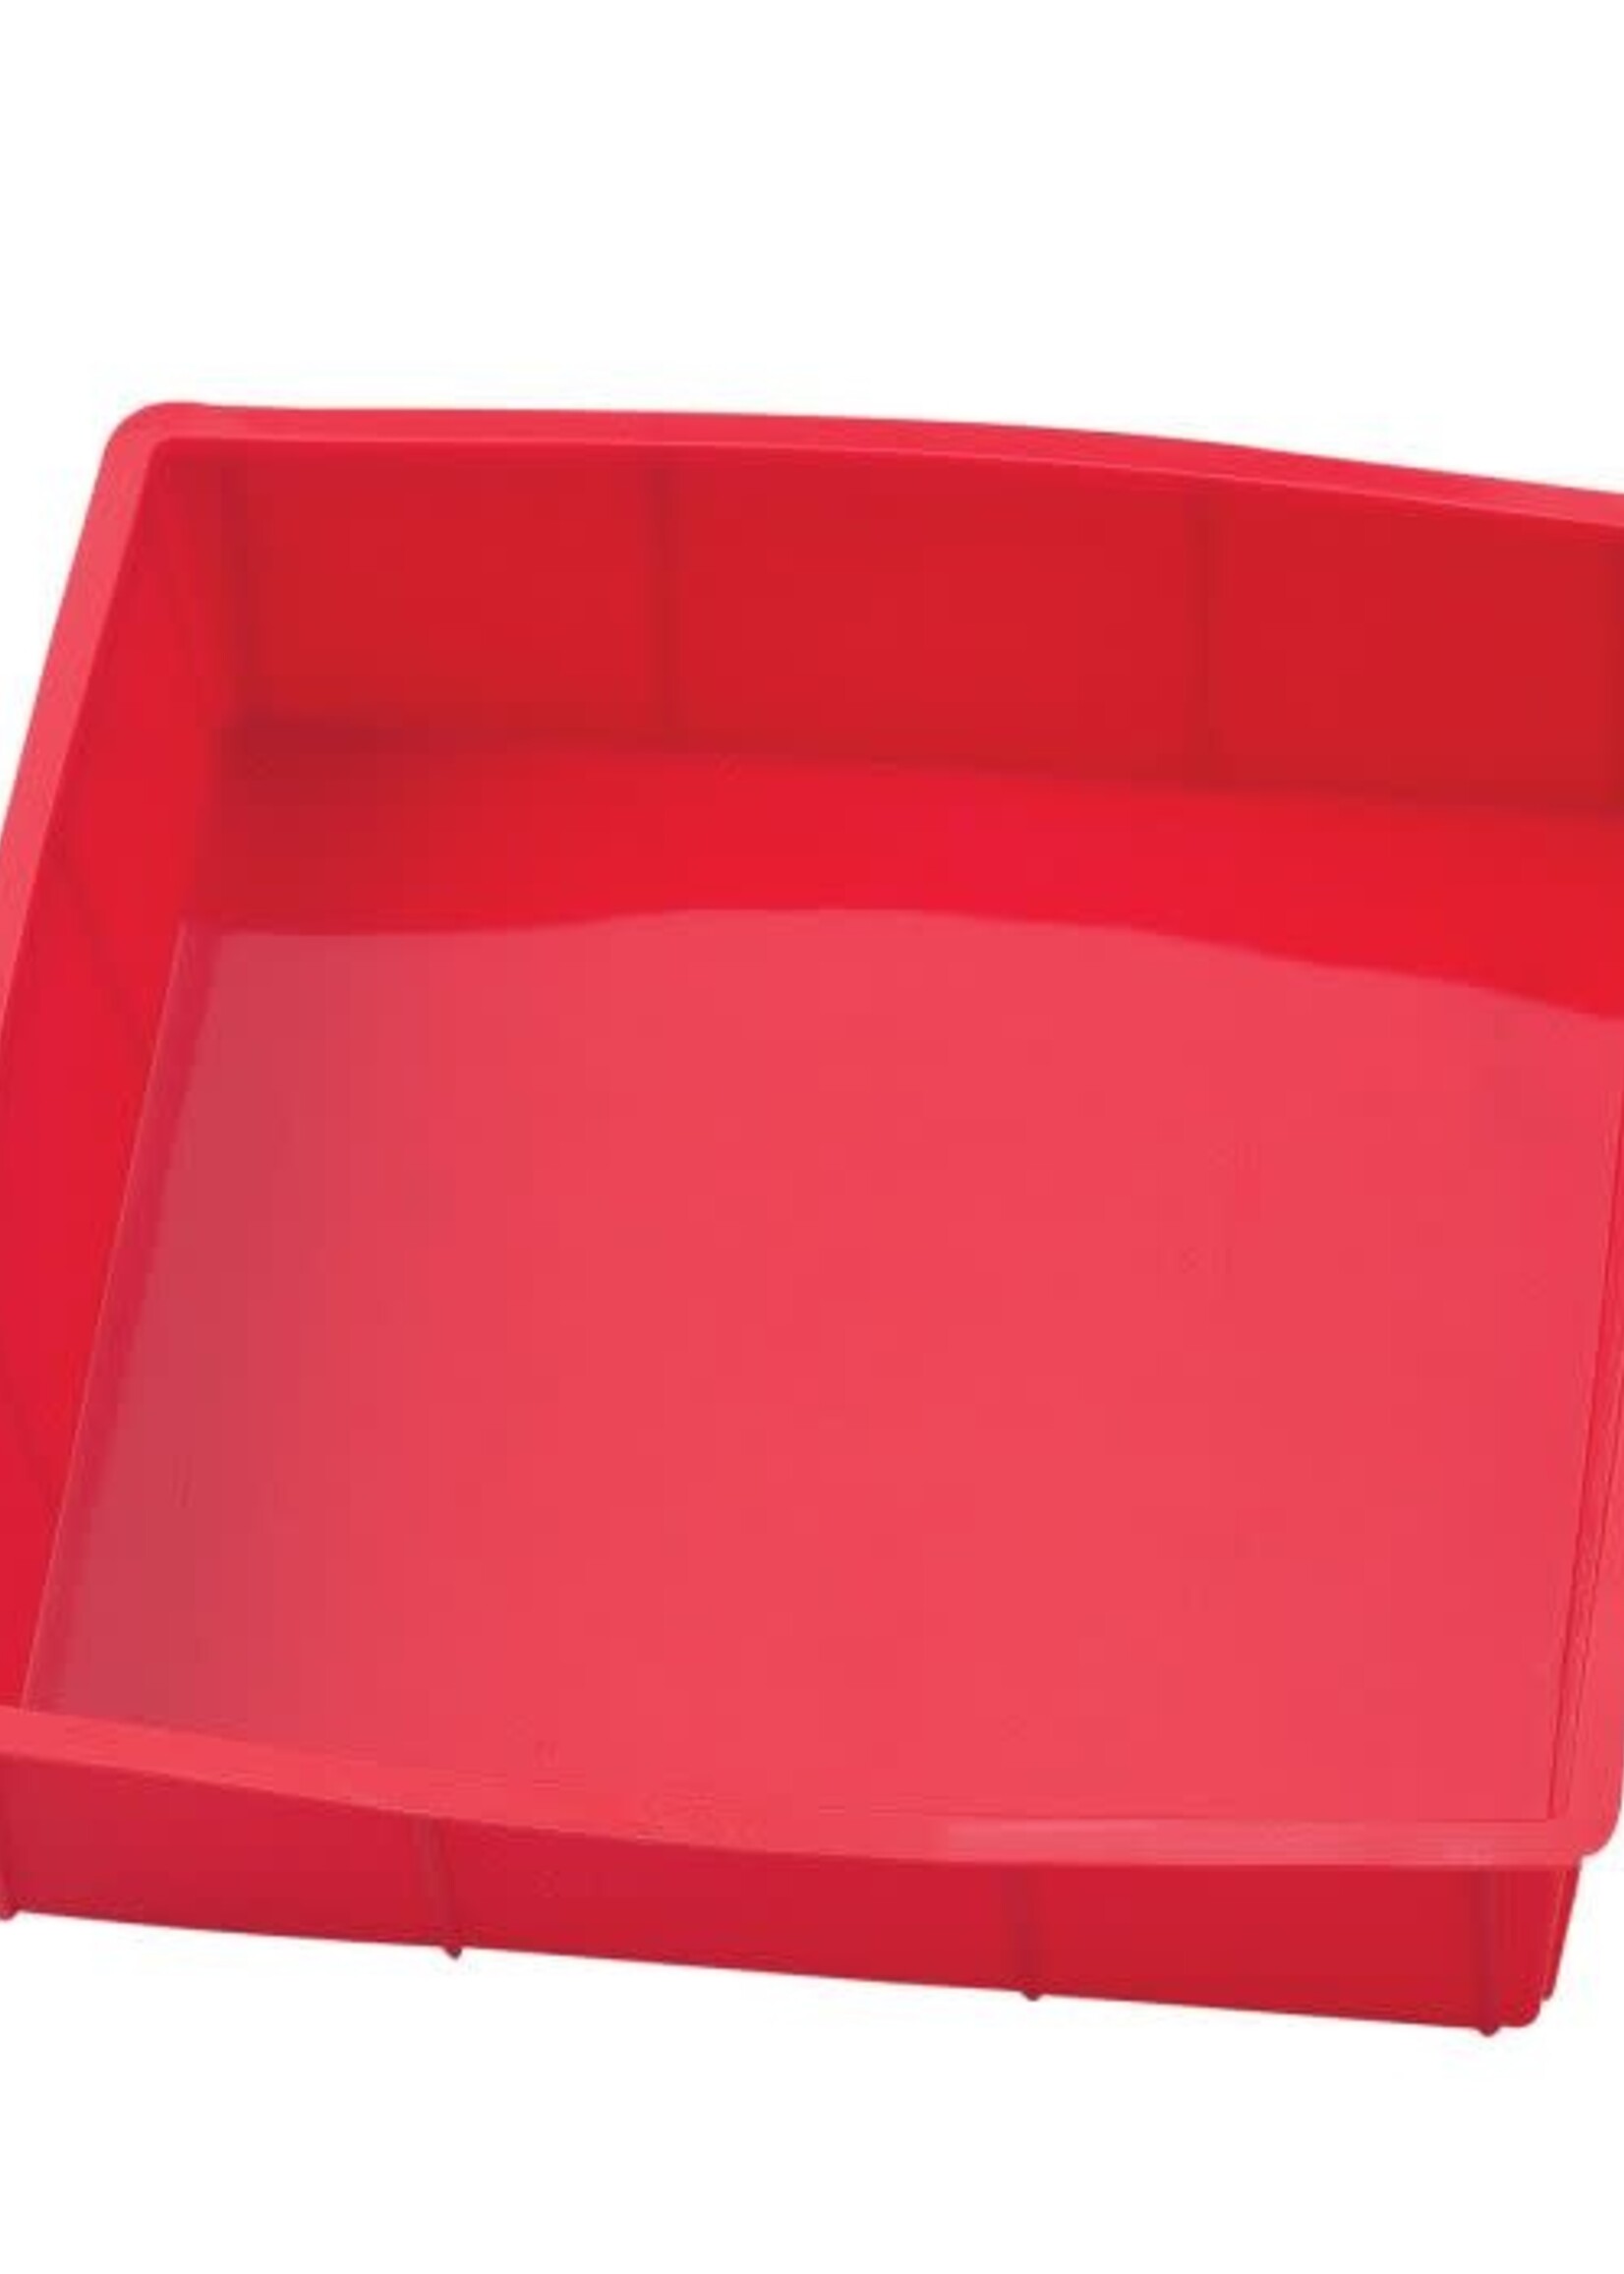 Mrs. Anderson’s Baking 9" Square Silicone Cake Pan